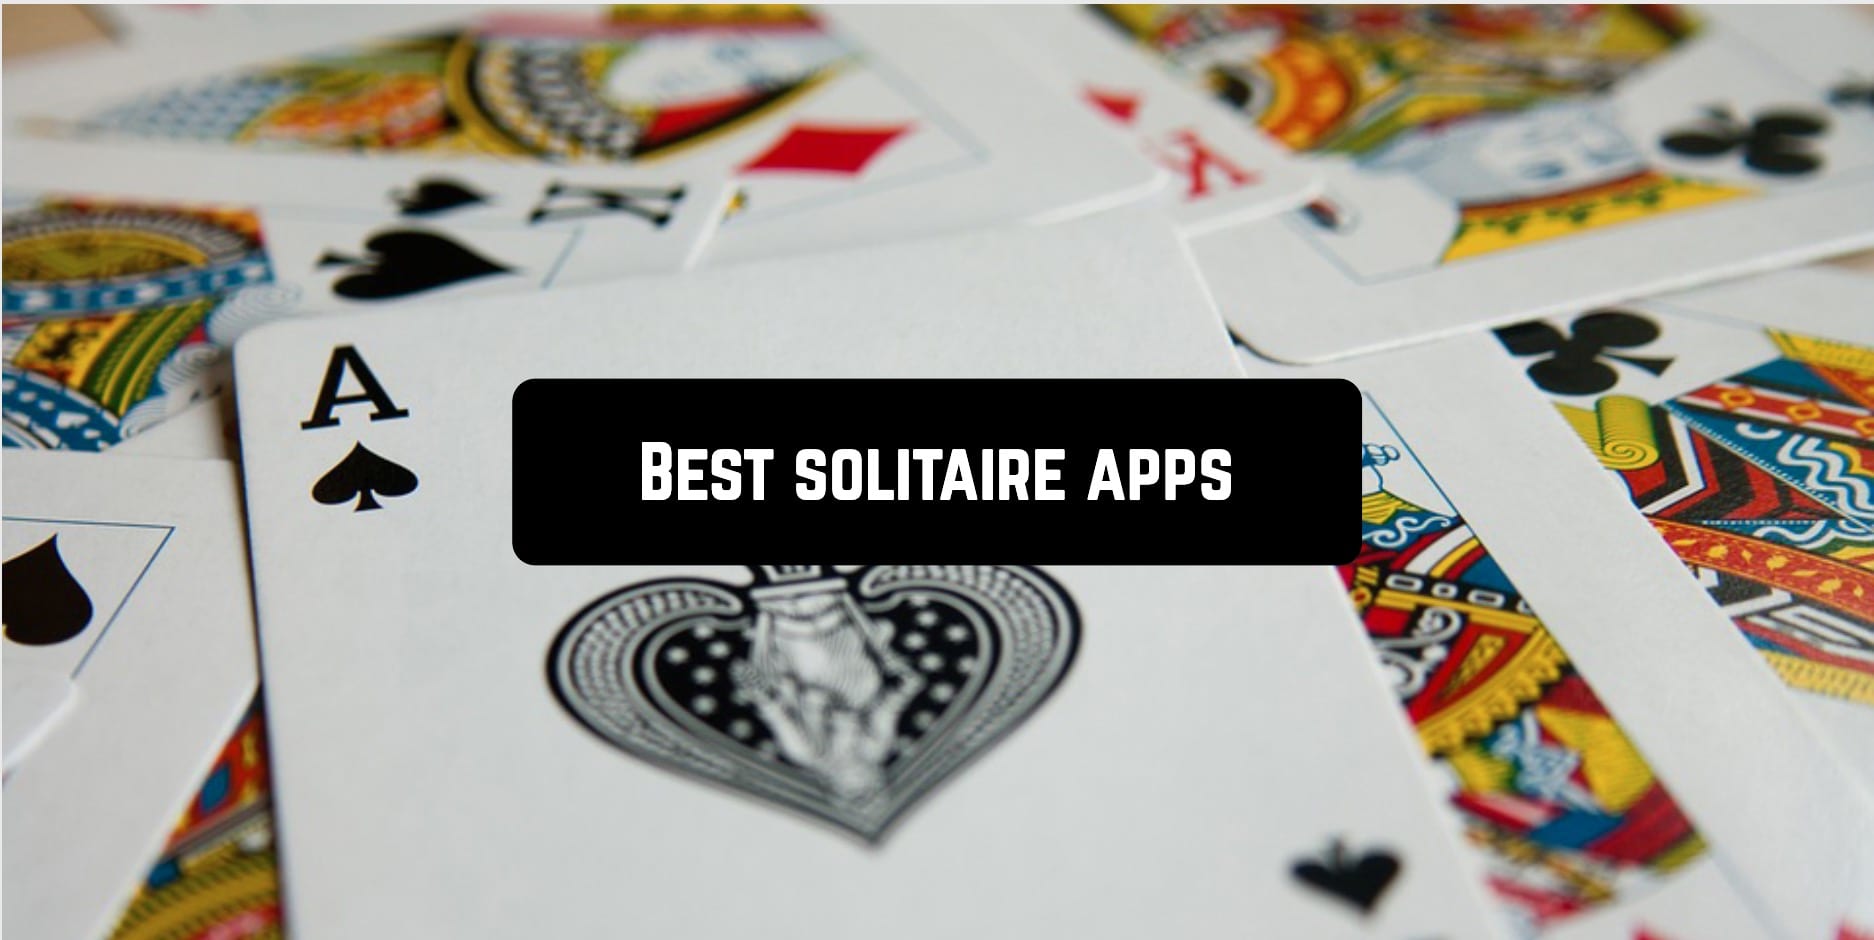 15 Best Solitaire Apps For Android Ios 2020 App Pearl Best Mobile Apps For Android Ios Devices